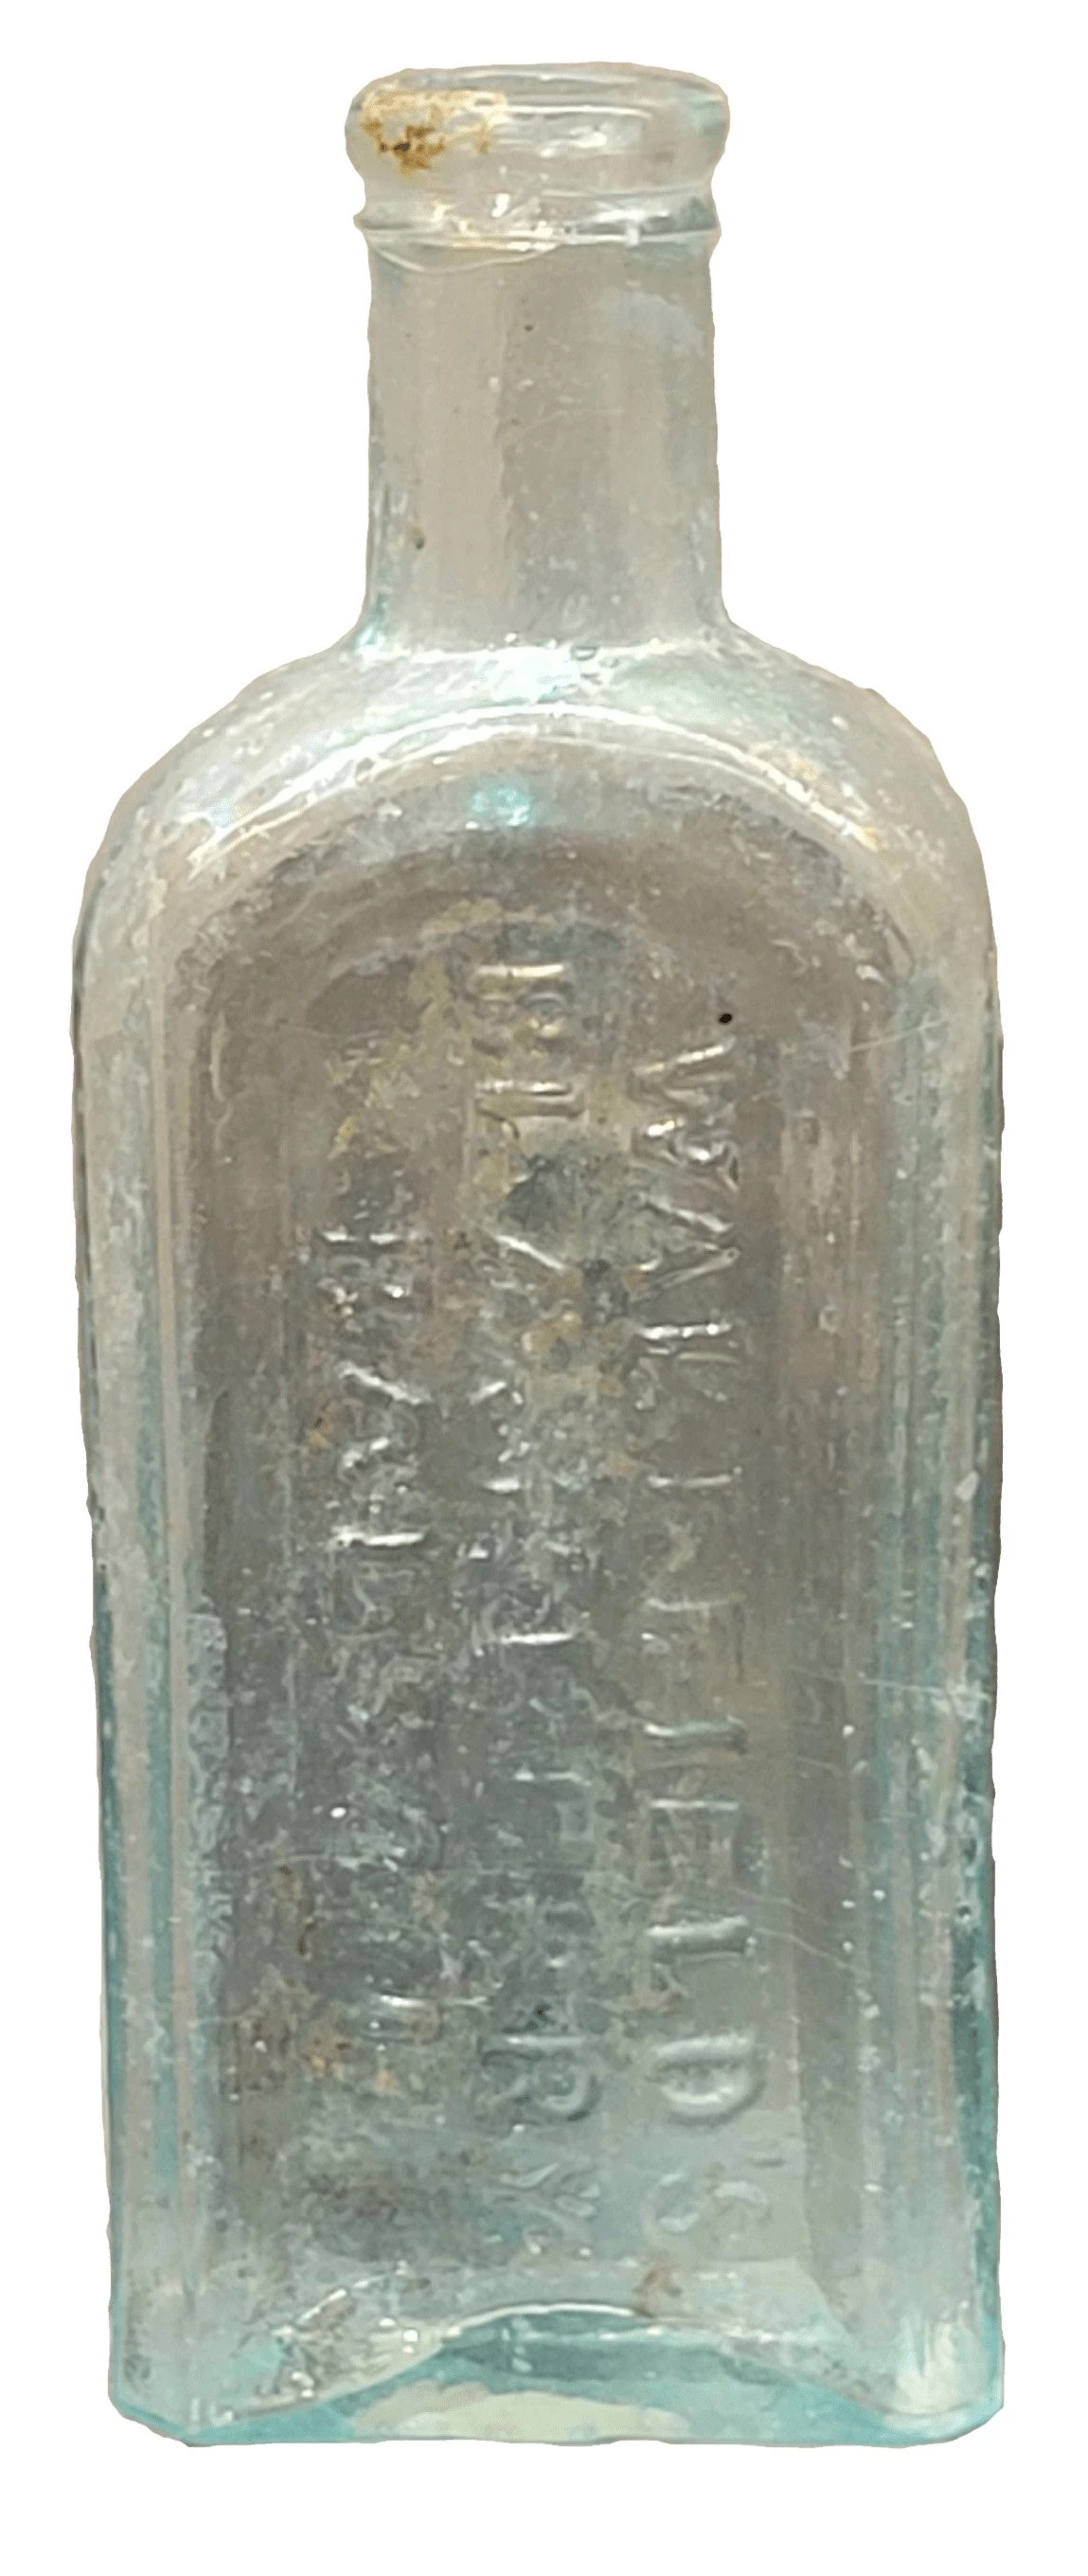 a clear glass bottle with Wakefields imprinted on the glass. No label.